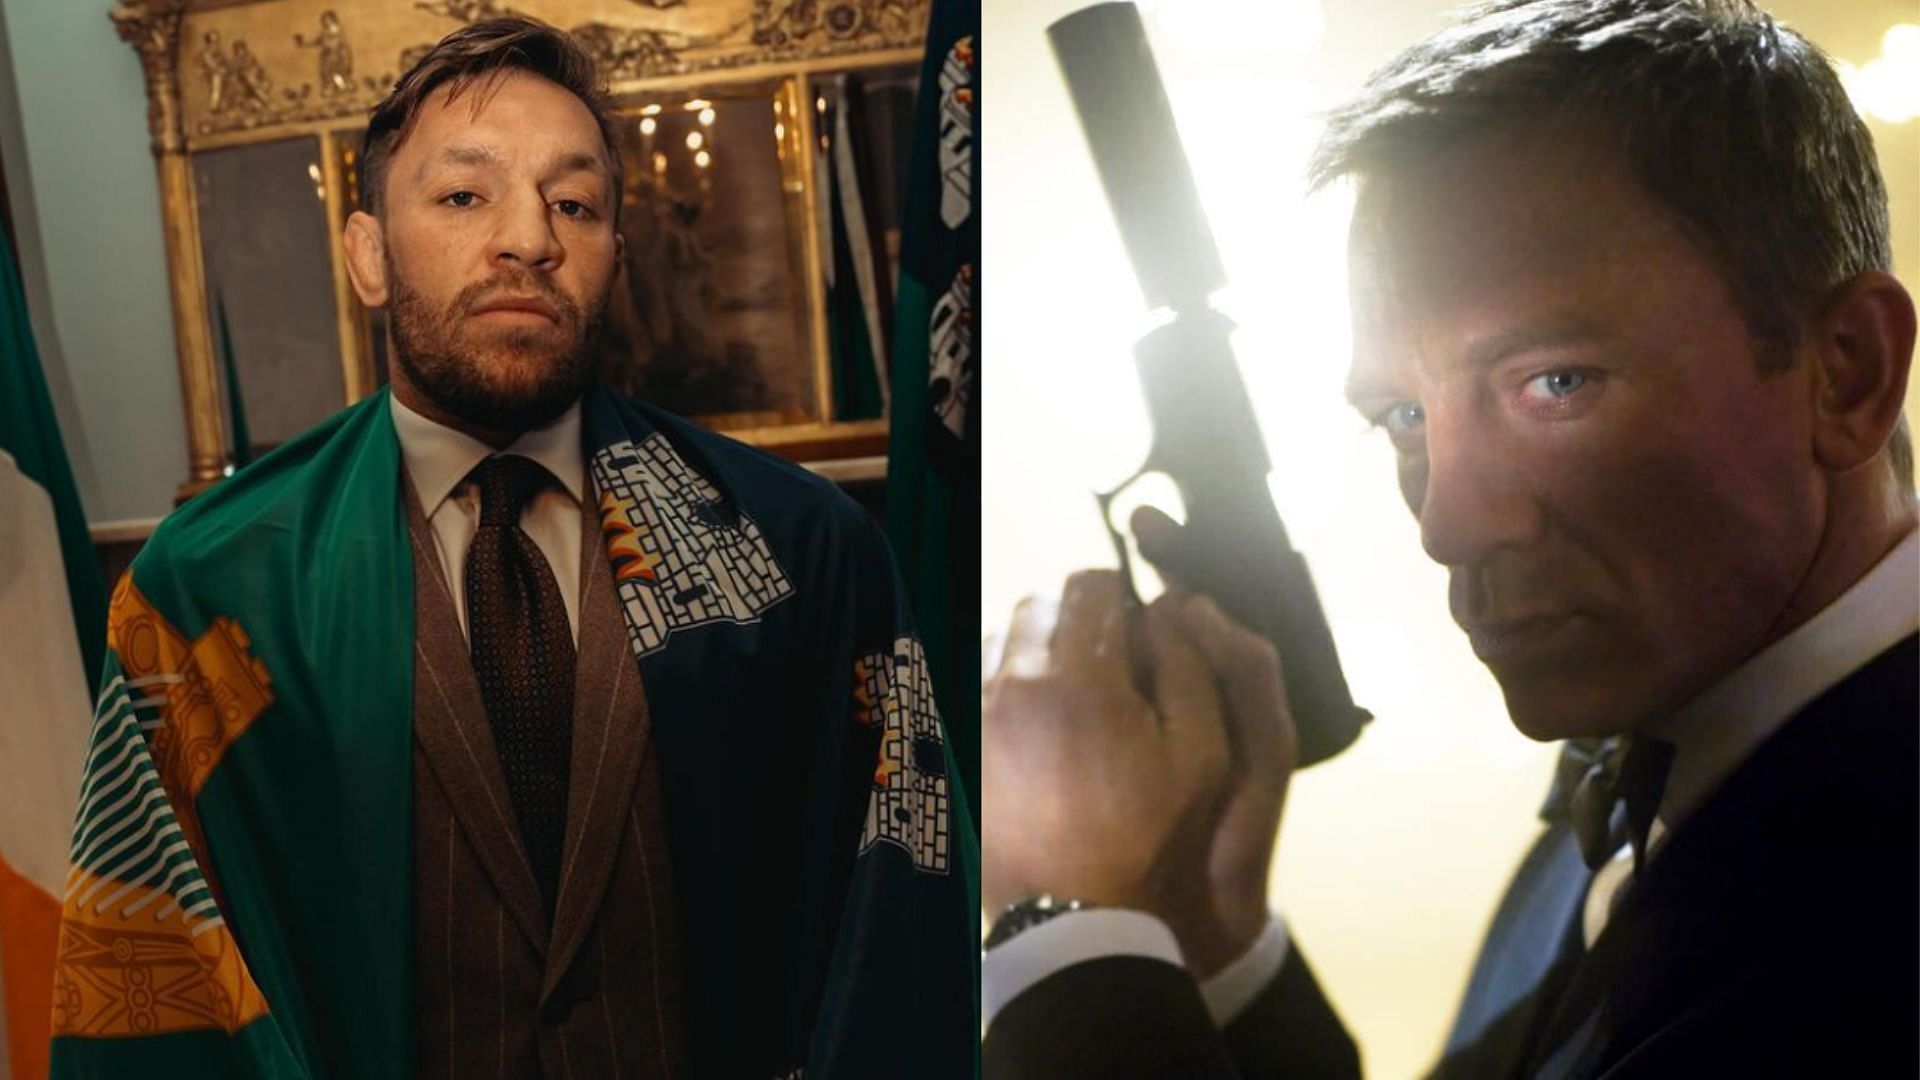 When Conor McGregor (left) revealed he was offered to play a James Bond villain opposite Daniel Craig (right) [Images courtesy of @thenotoriousmma &amp; @craigdanielbond on Instagram]